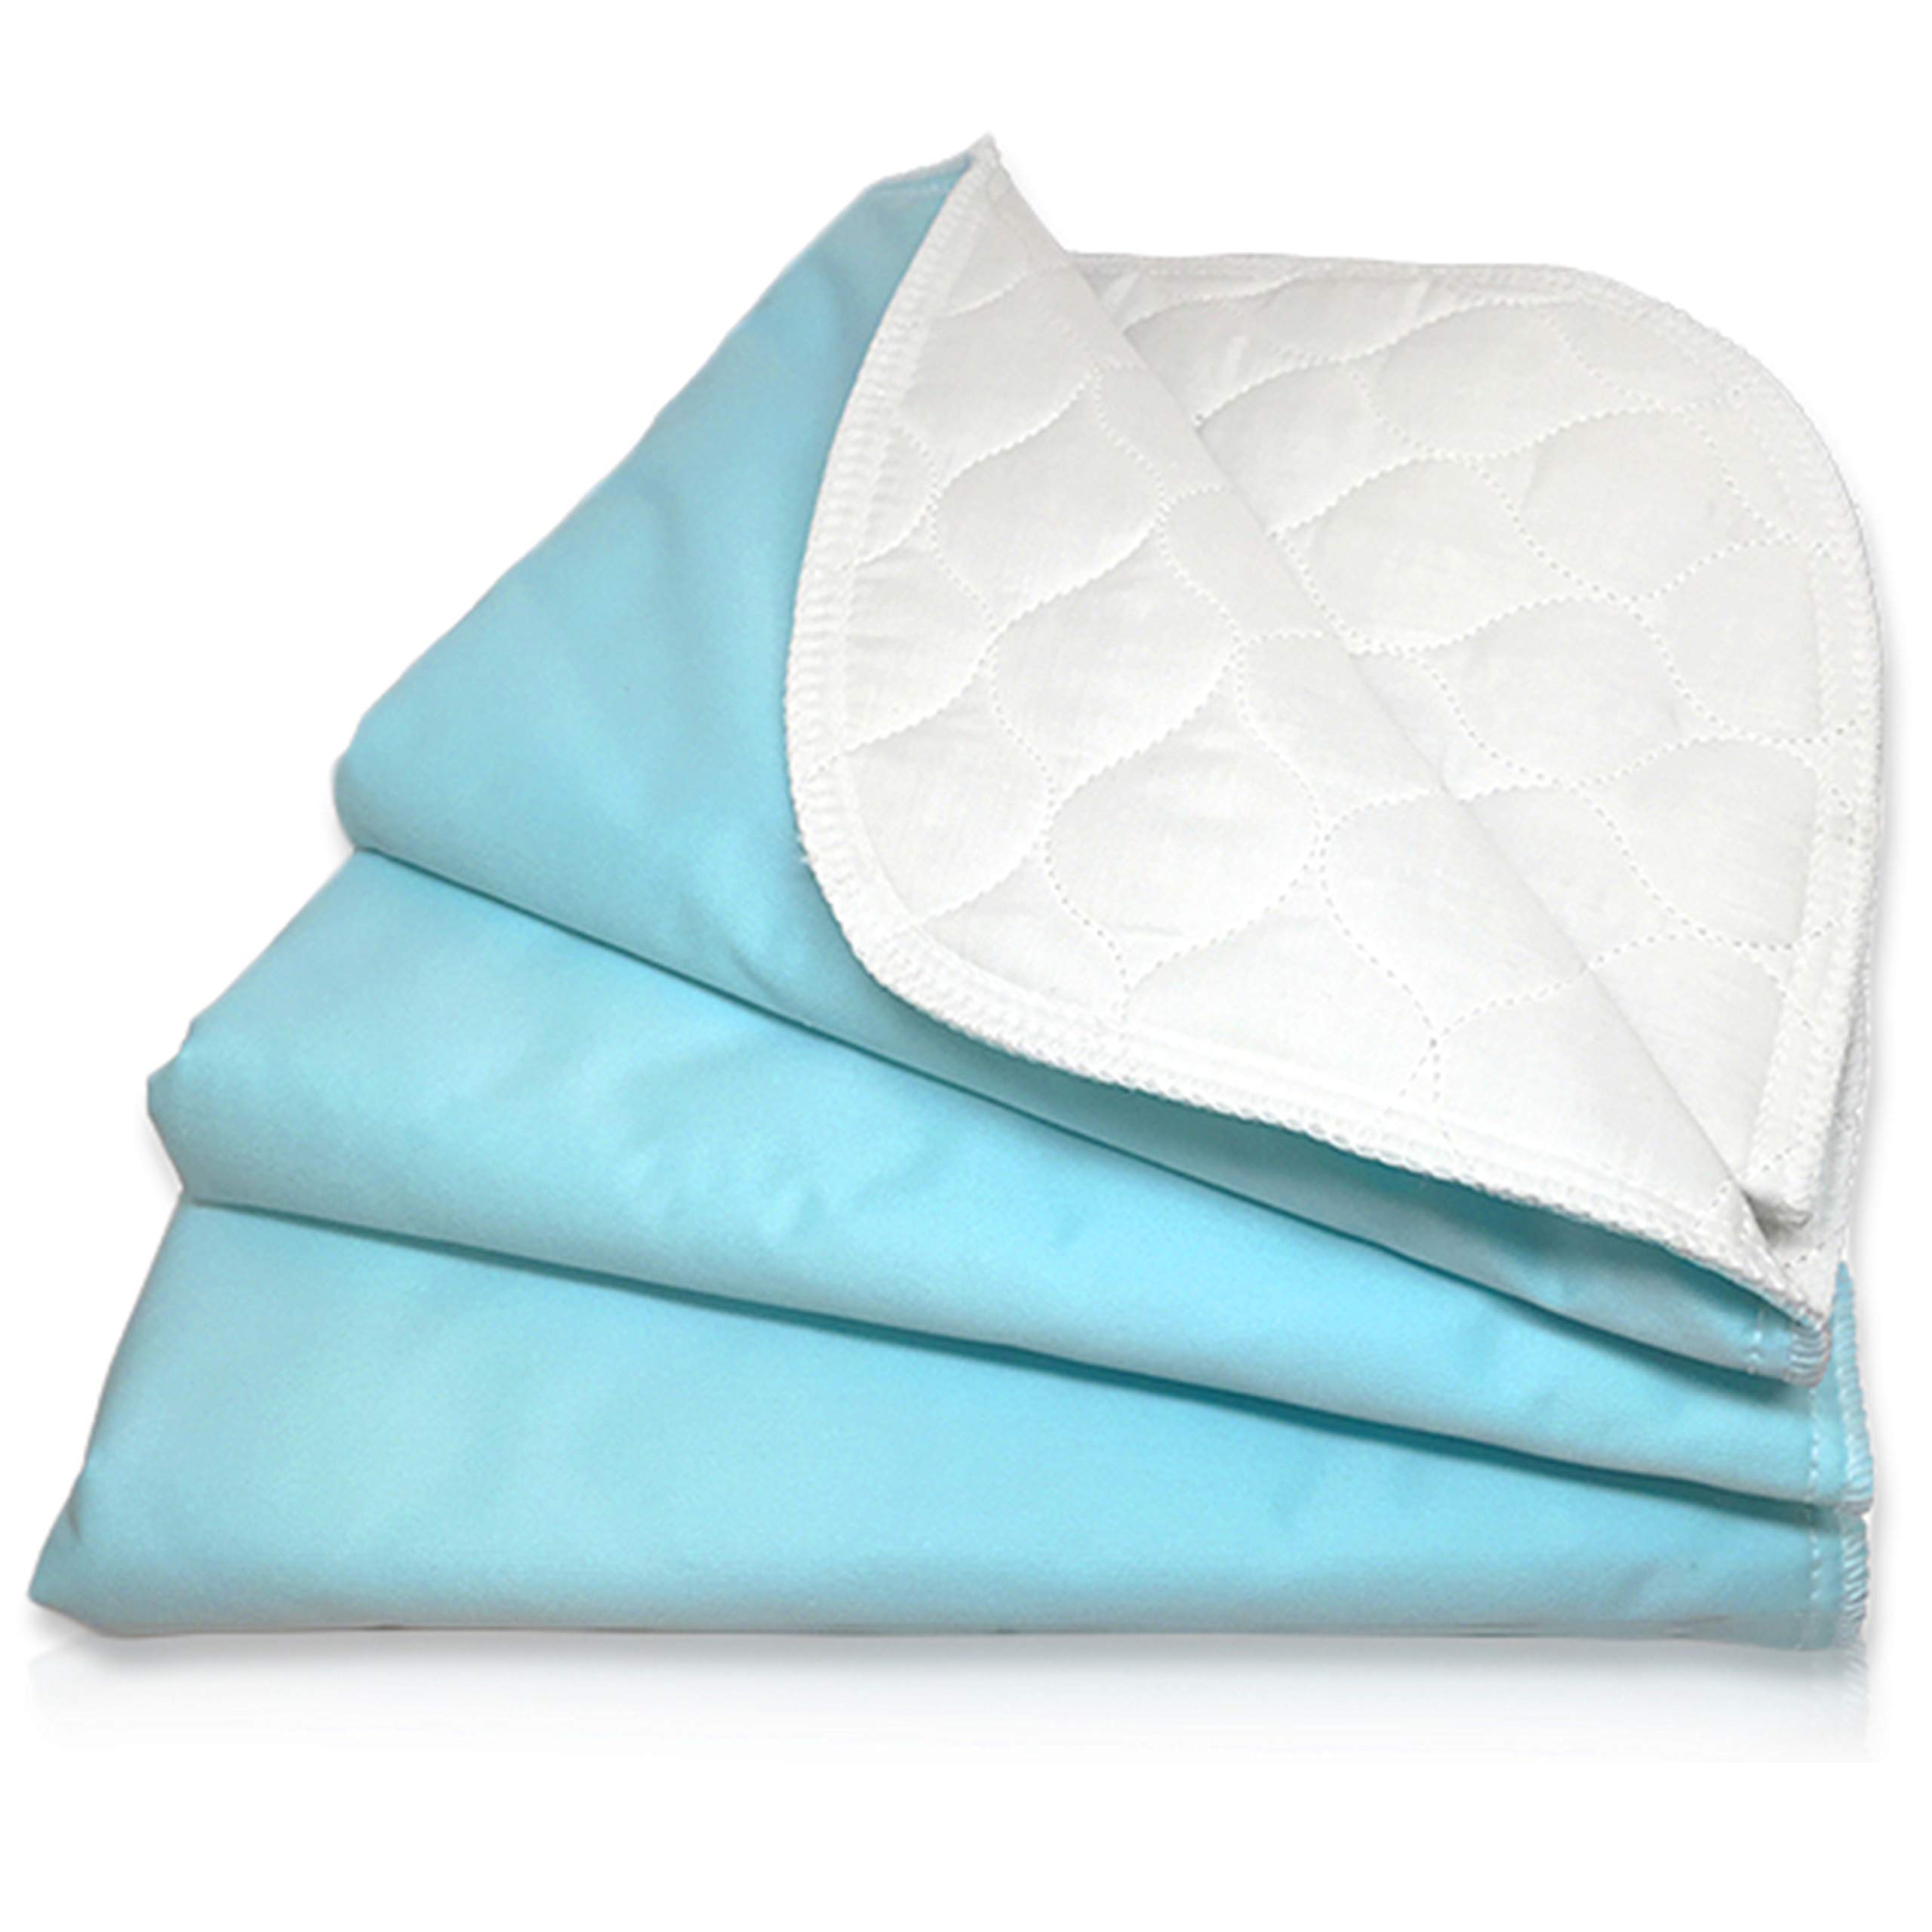 Incontinence Bed Pads Washable - Heavy Duty Waterproof Bed Pads - Soft  Rayon and Poly Blend Chucks - Heavy Duty Absorbent Reusable Pee Pads for  Adults - 18 x 24 - 1 Pack 18 x 24 (1 Pack)